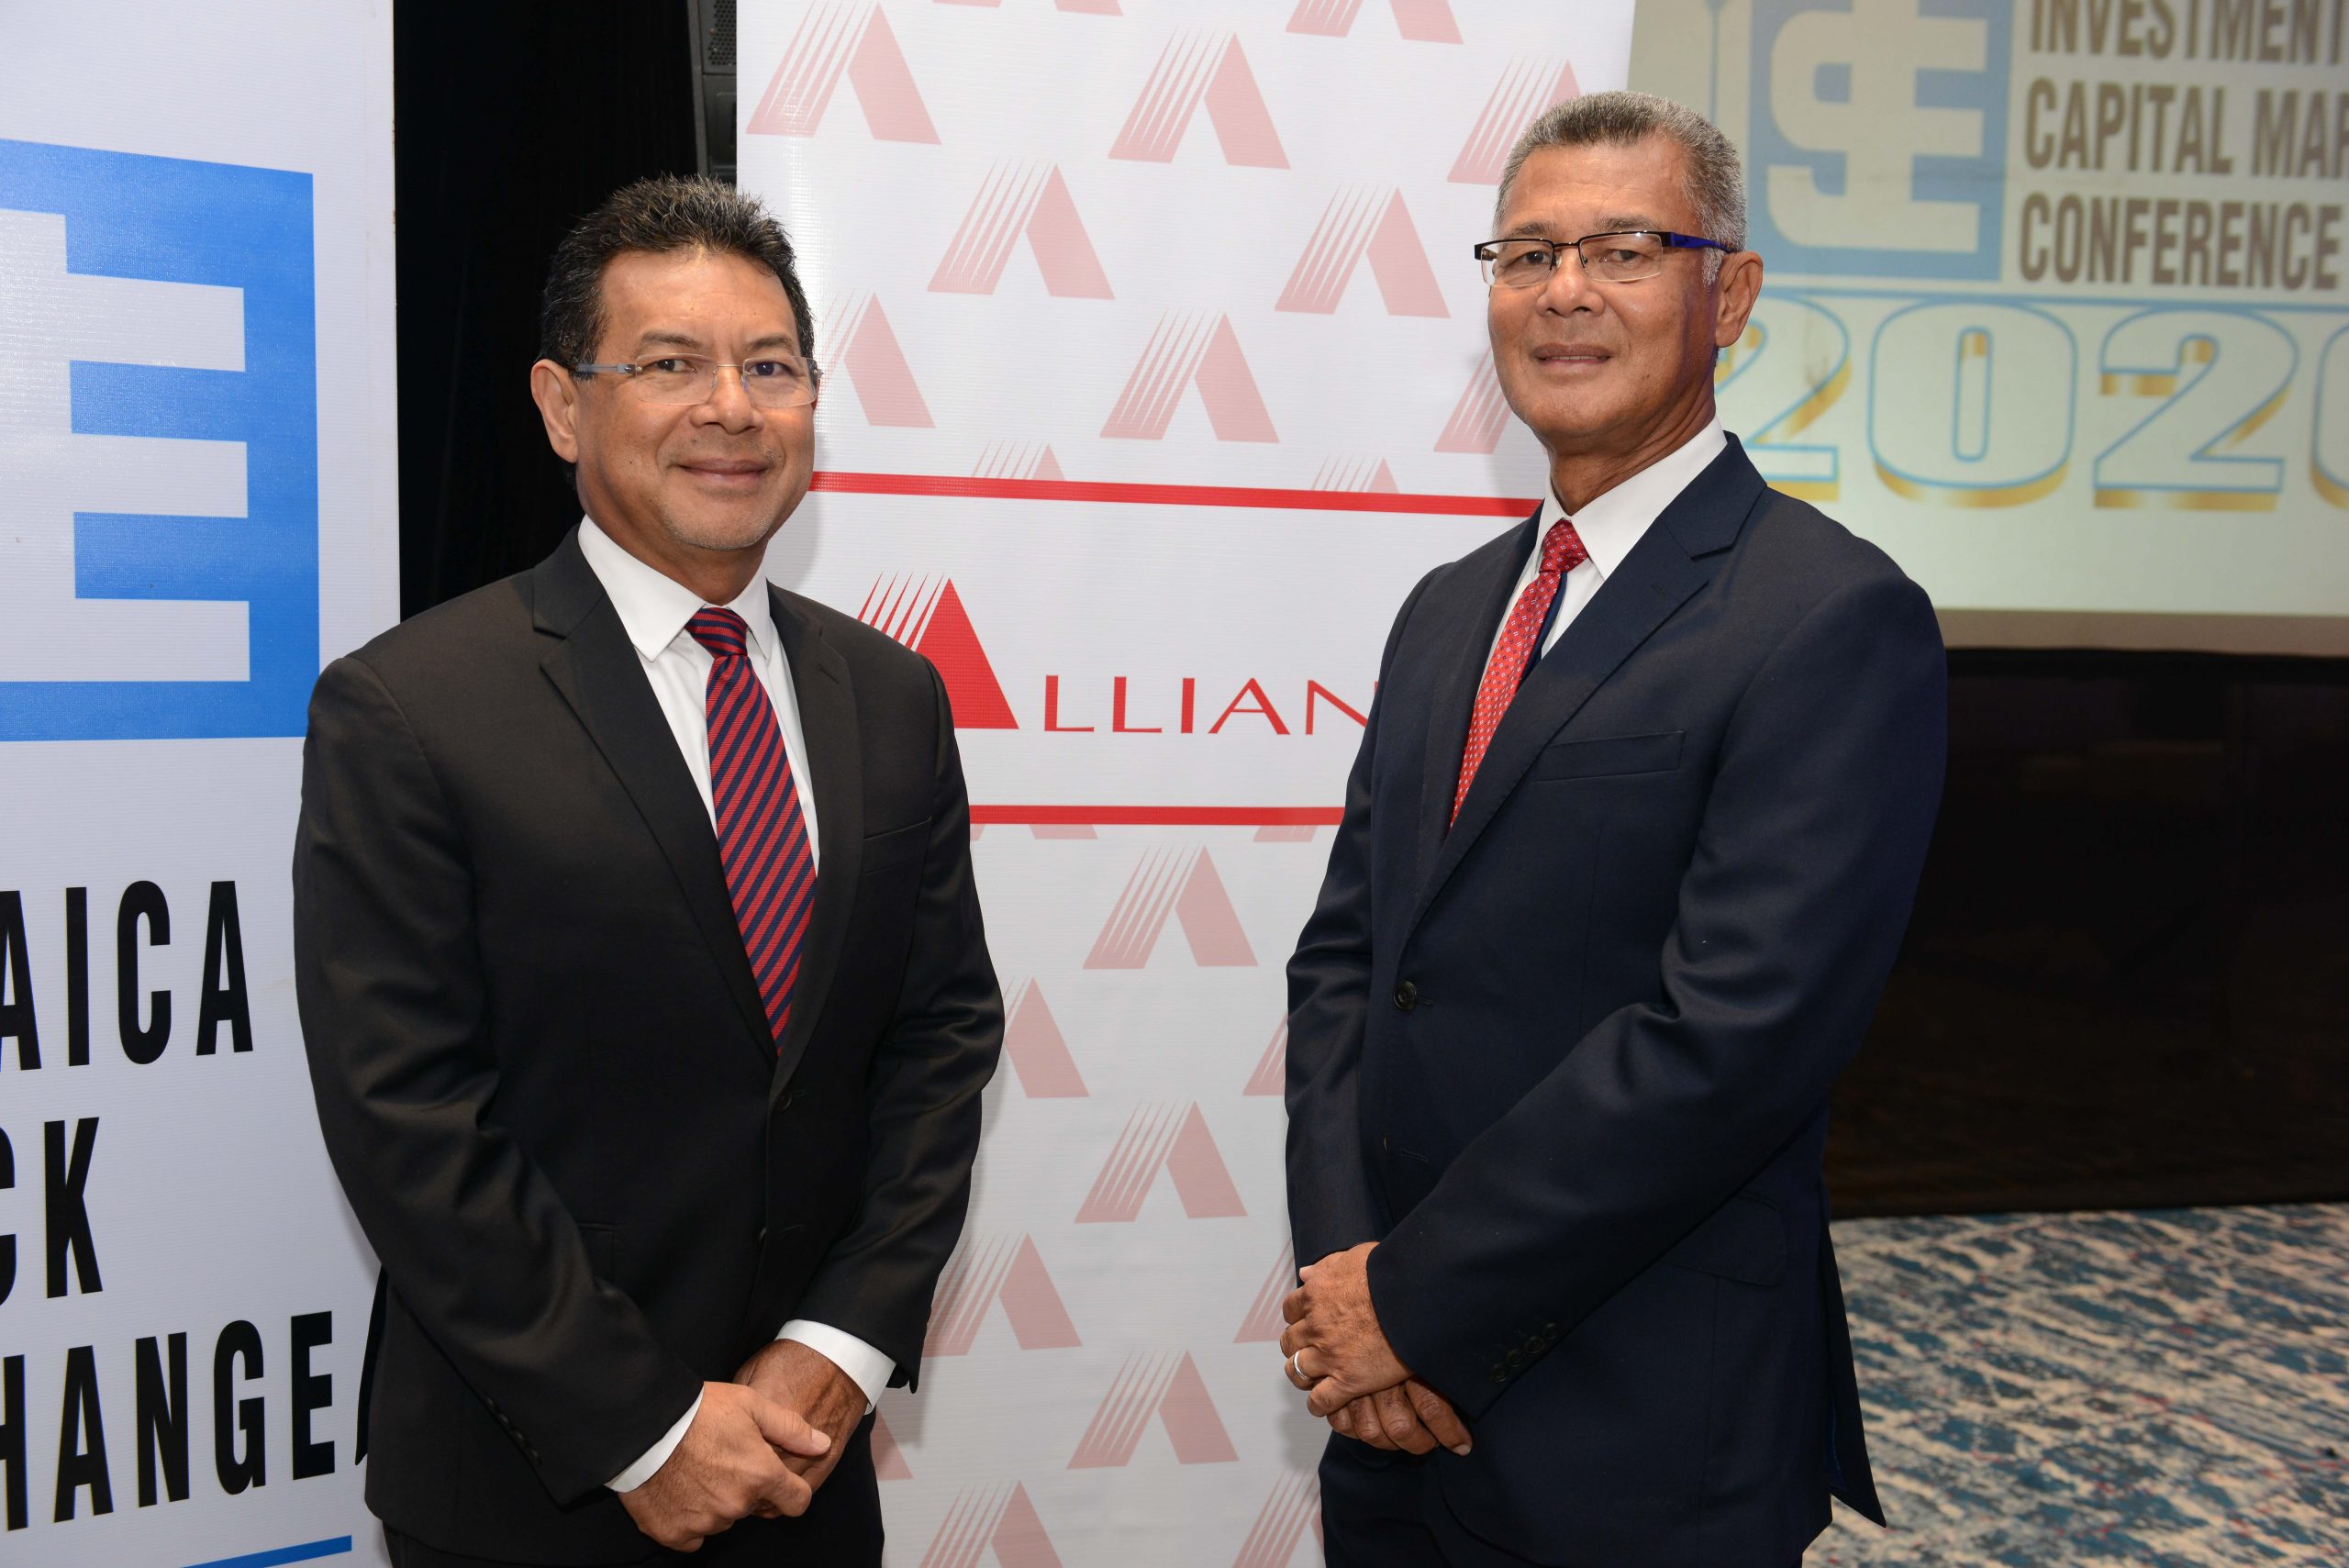 Alliance IPO to top $500m</p>
<div>31 Jan, 2020</div>
<p>